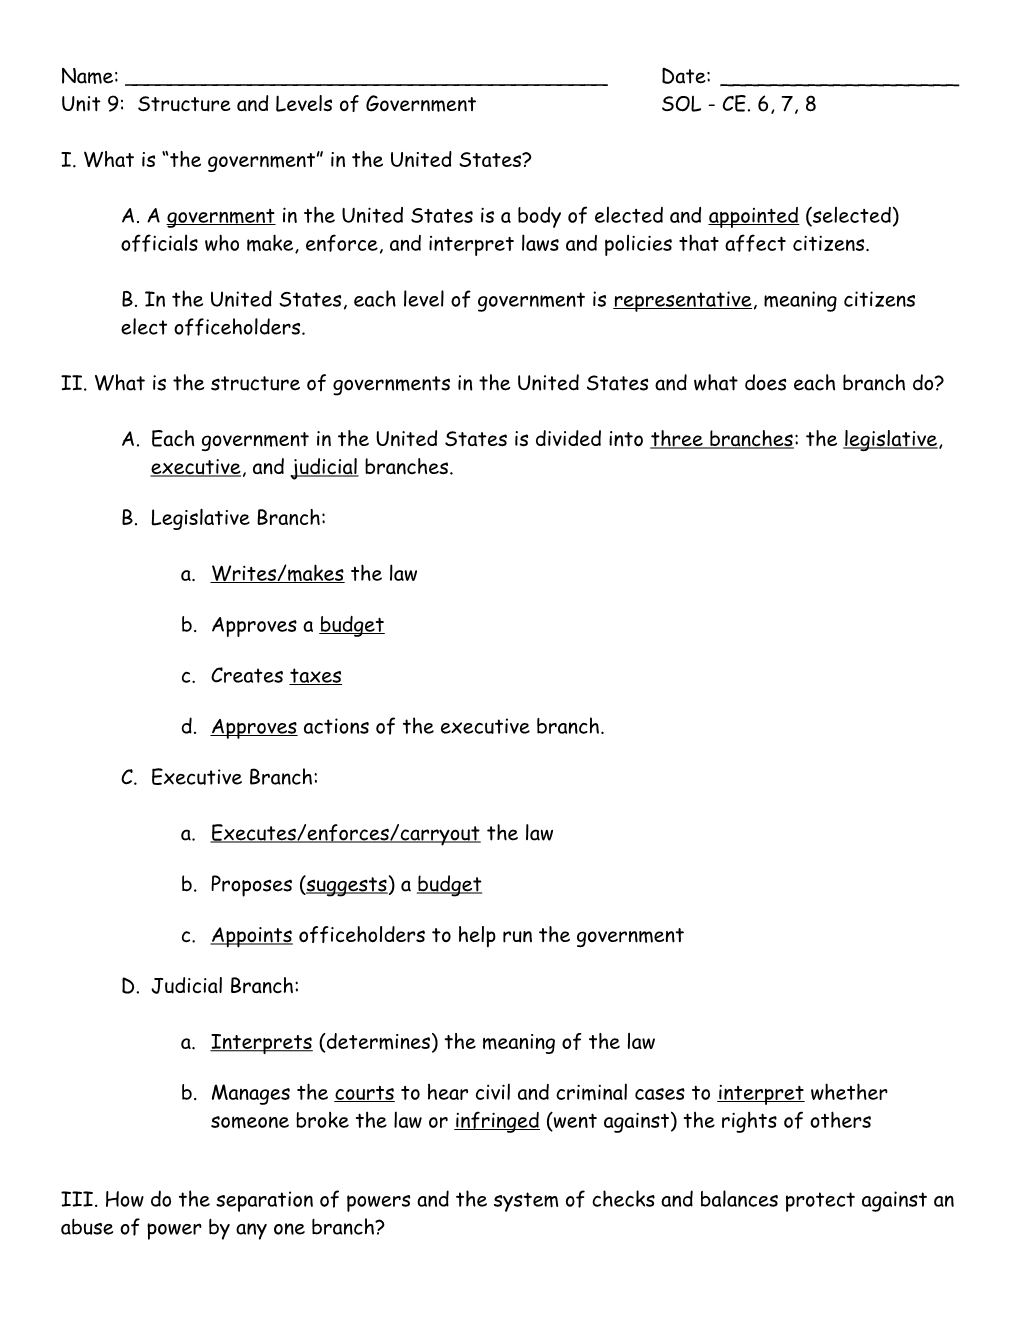 Unit 9: Structure and Levels of Government SOL - CE. 6, 7, 8